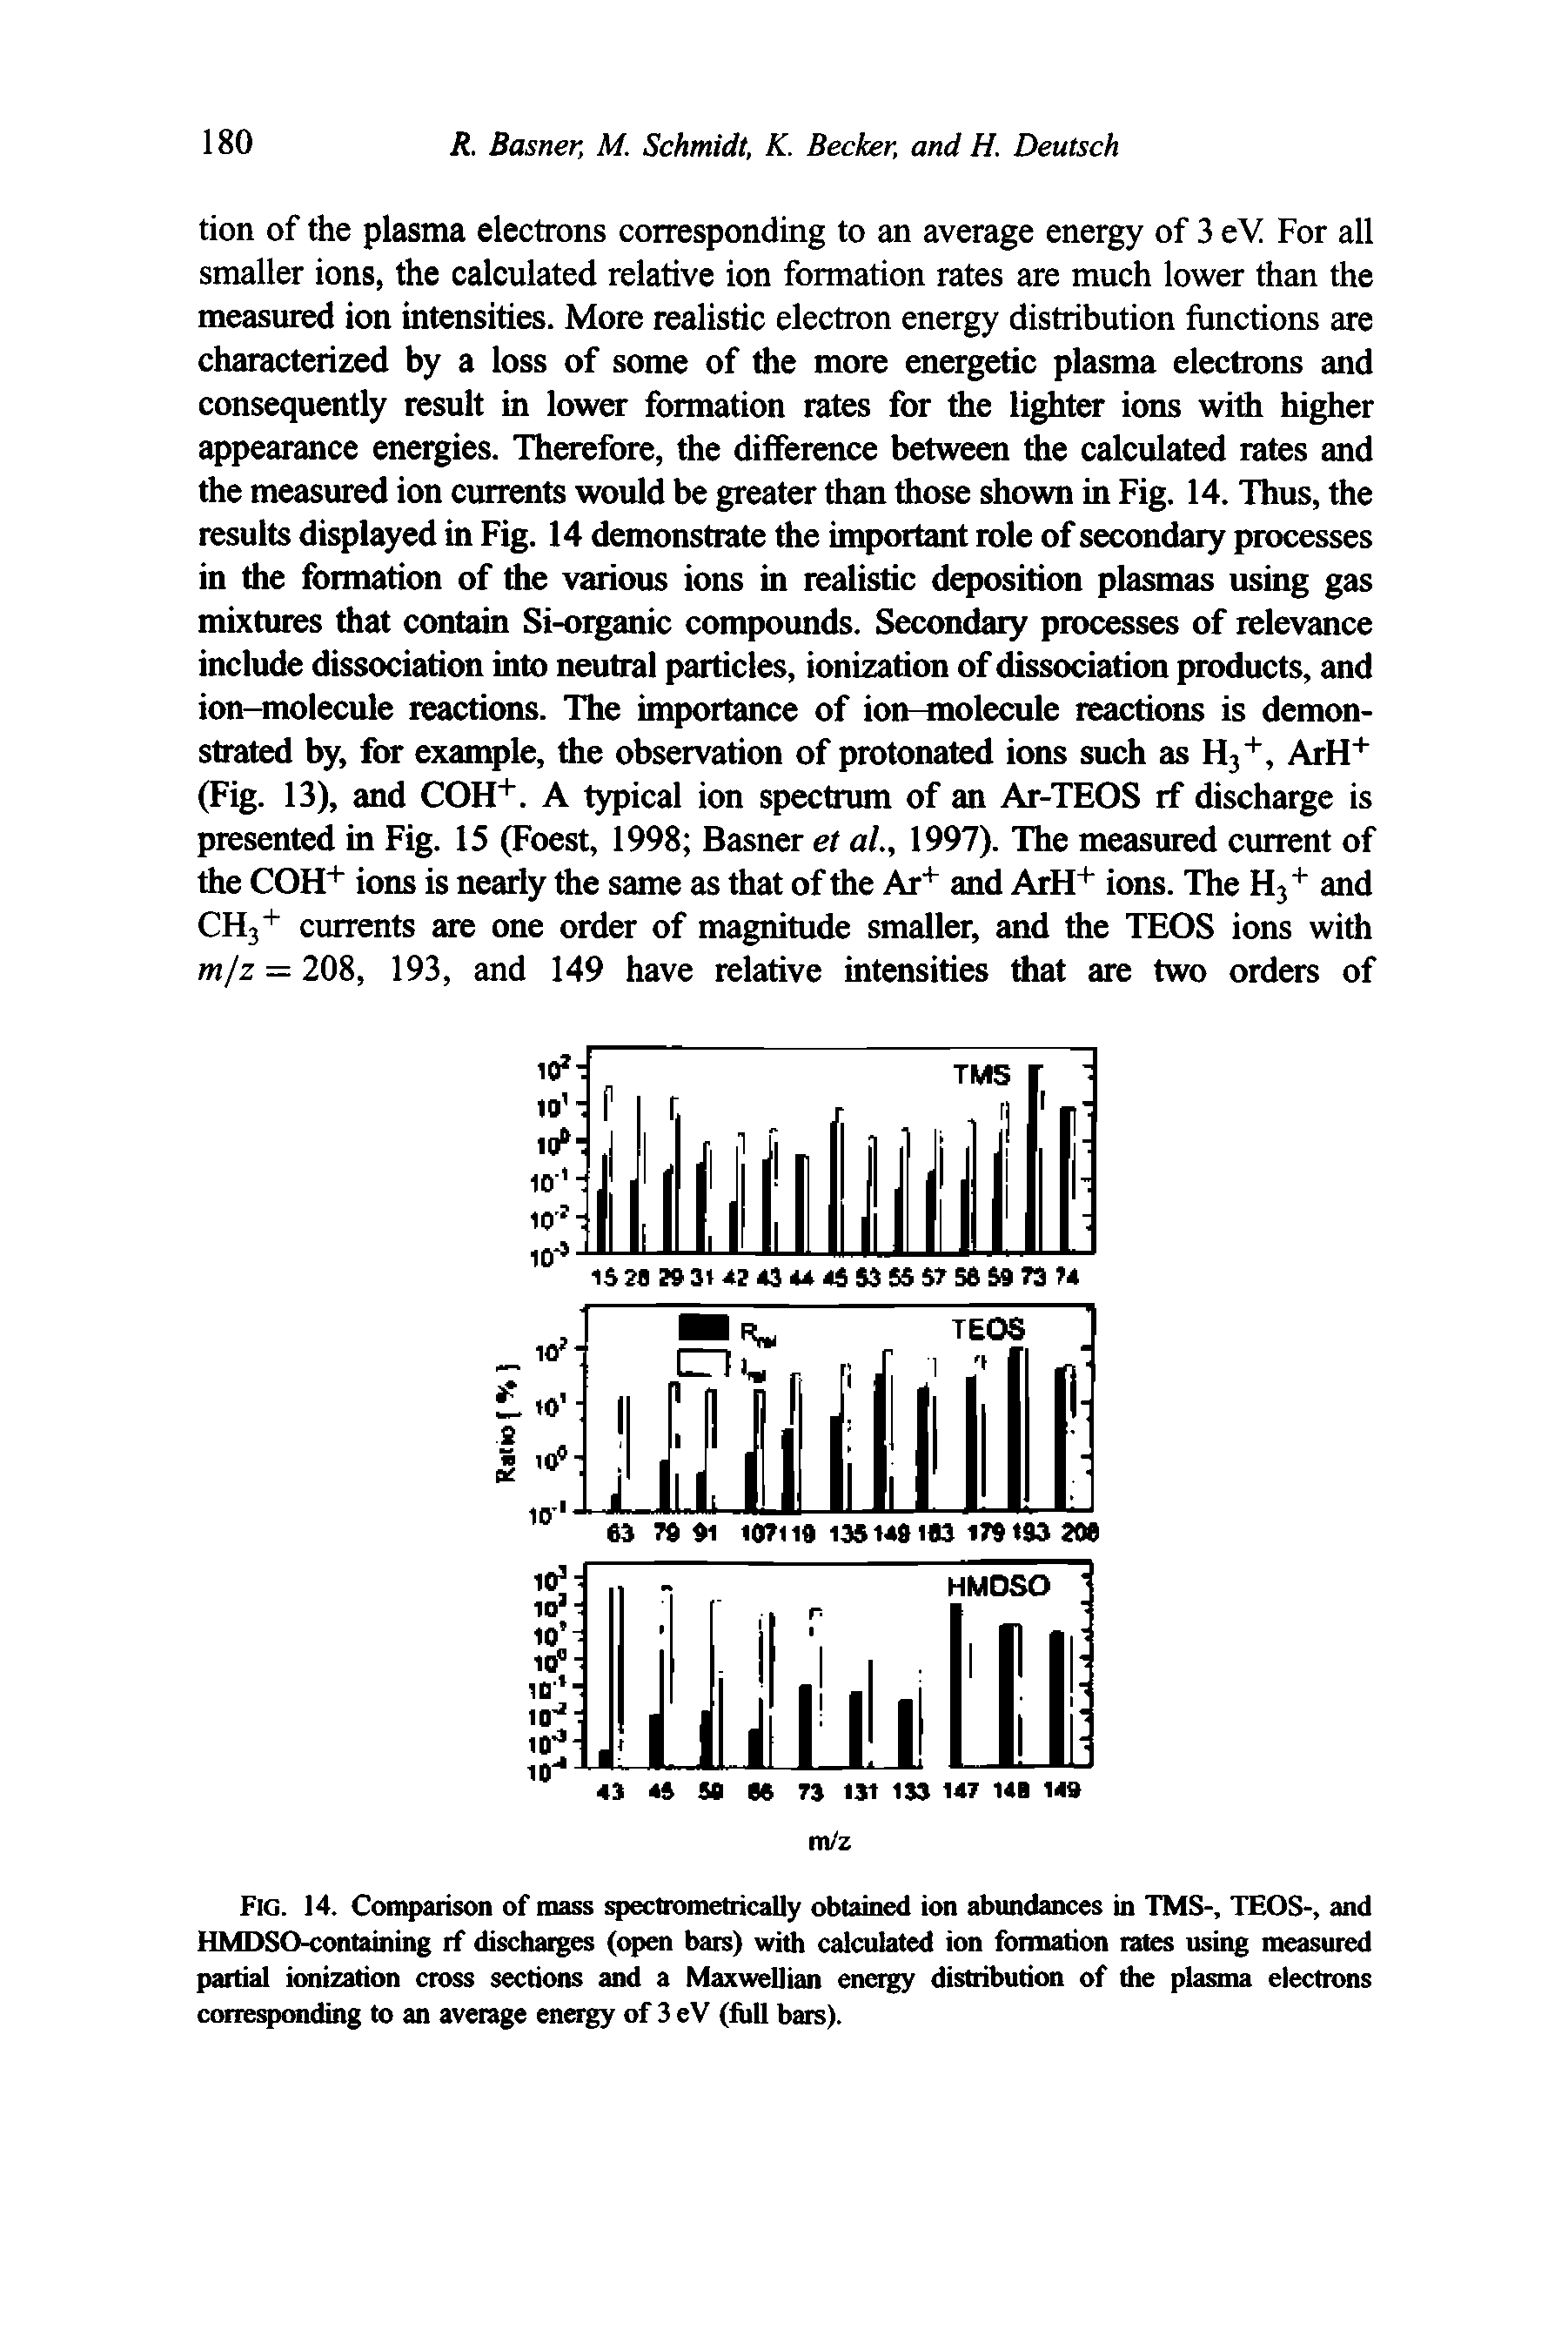 Fig. 14. Comparison of mass spectrometrically obtained ion abundances in TMS-, TEOS-, and HMDSO-containing rf discharges (open bars) with calculated ion foimation rates using measured partial ionization cross sections and a Maxwellian enetgy distribution of the plasma electrons corresponding to an average energy of 3 eV (full bars).